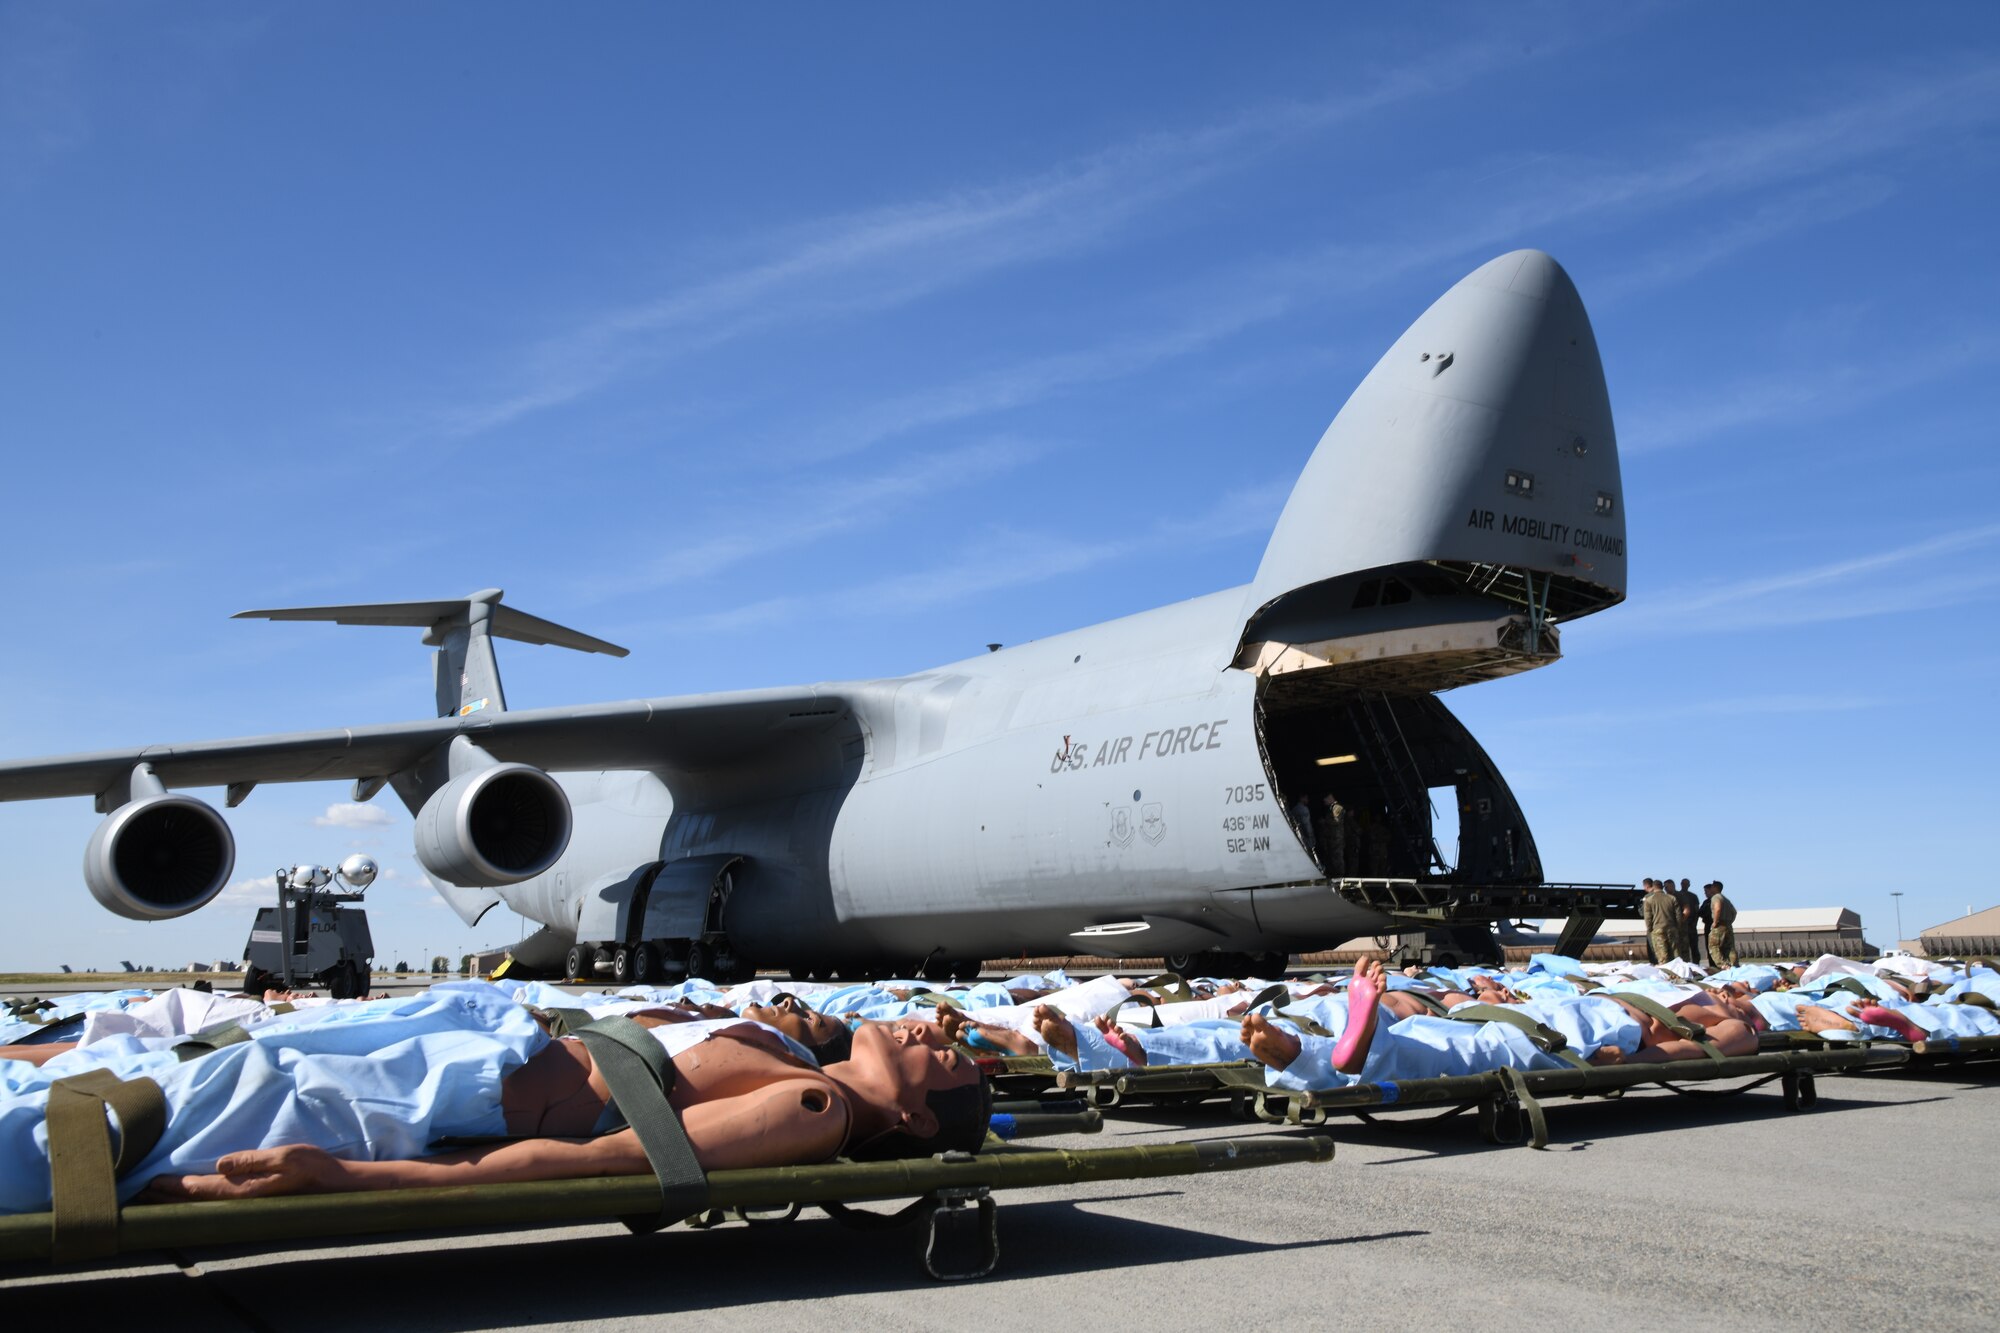 Mannequins lie in position prior to the aeromedical evacuation demonstration for media day at Fairchild Air Force Base, Wash., Sept. 24, 2019, in support of exercise Mobility Guardian 2019. Exercise Mobility Guardian is Air Mobility Command's premier large-scale mobility exercise. Through robust and relevant training, Mobility Guardian improves the readiness and capabilities of Mobility Airmen to deliver rapid global mobility and builds a more lethal and ready Air Force.(U.S. Air Force photo by TSgt Esteban Esquivel).